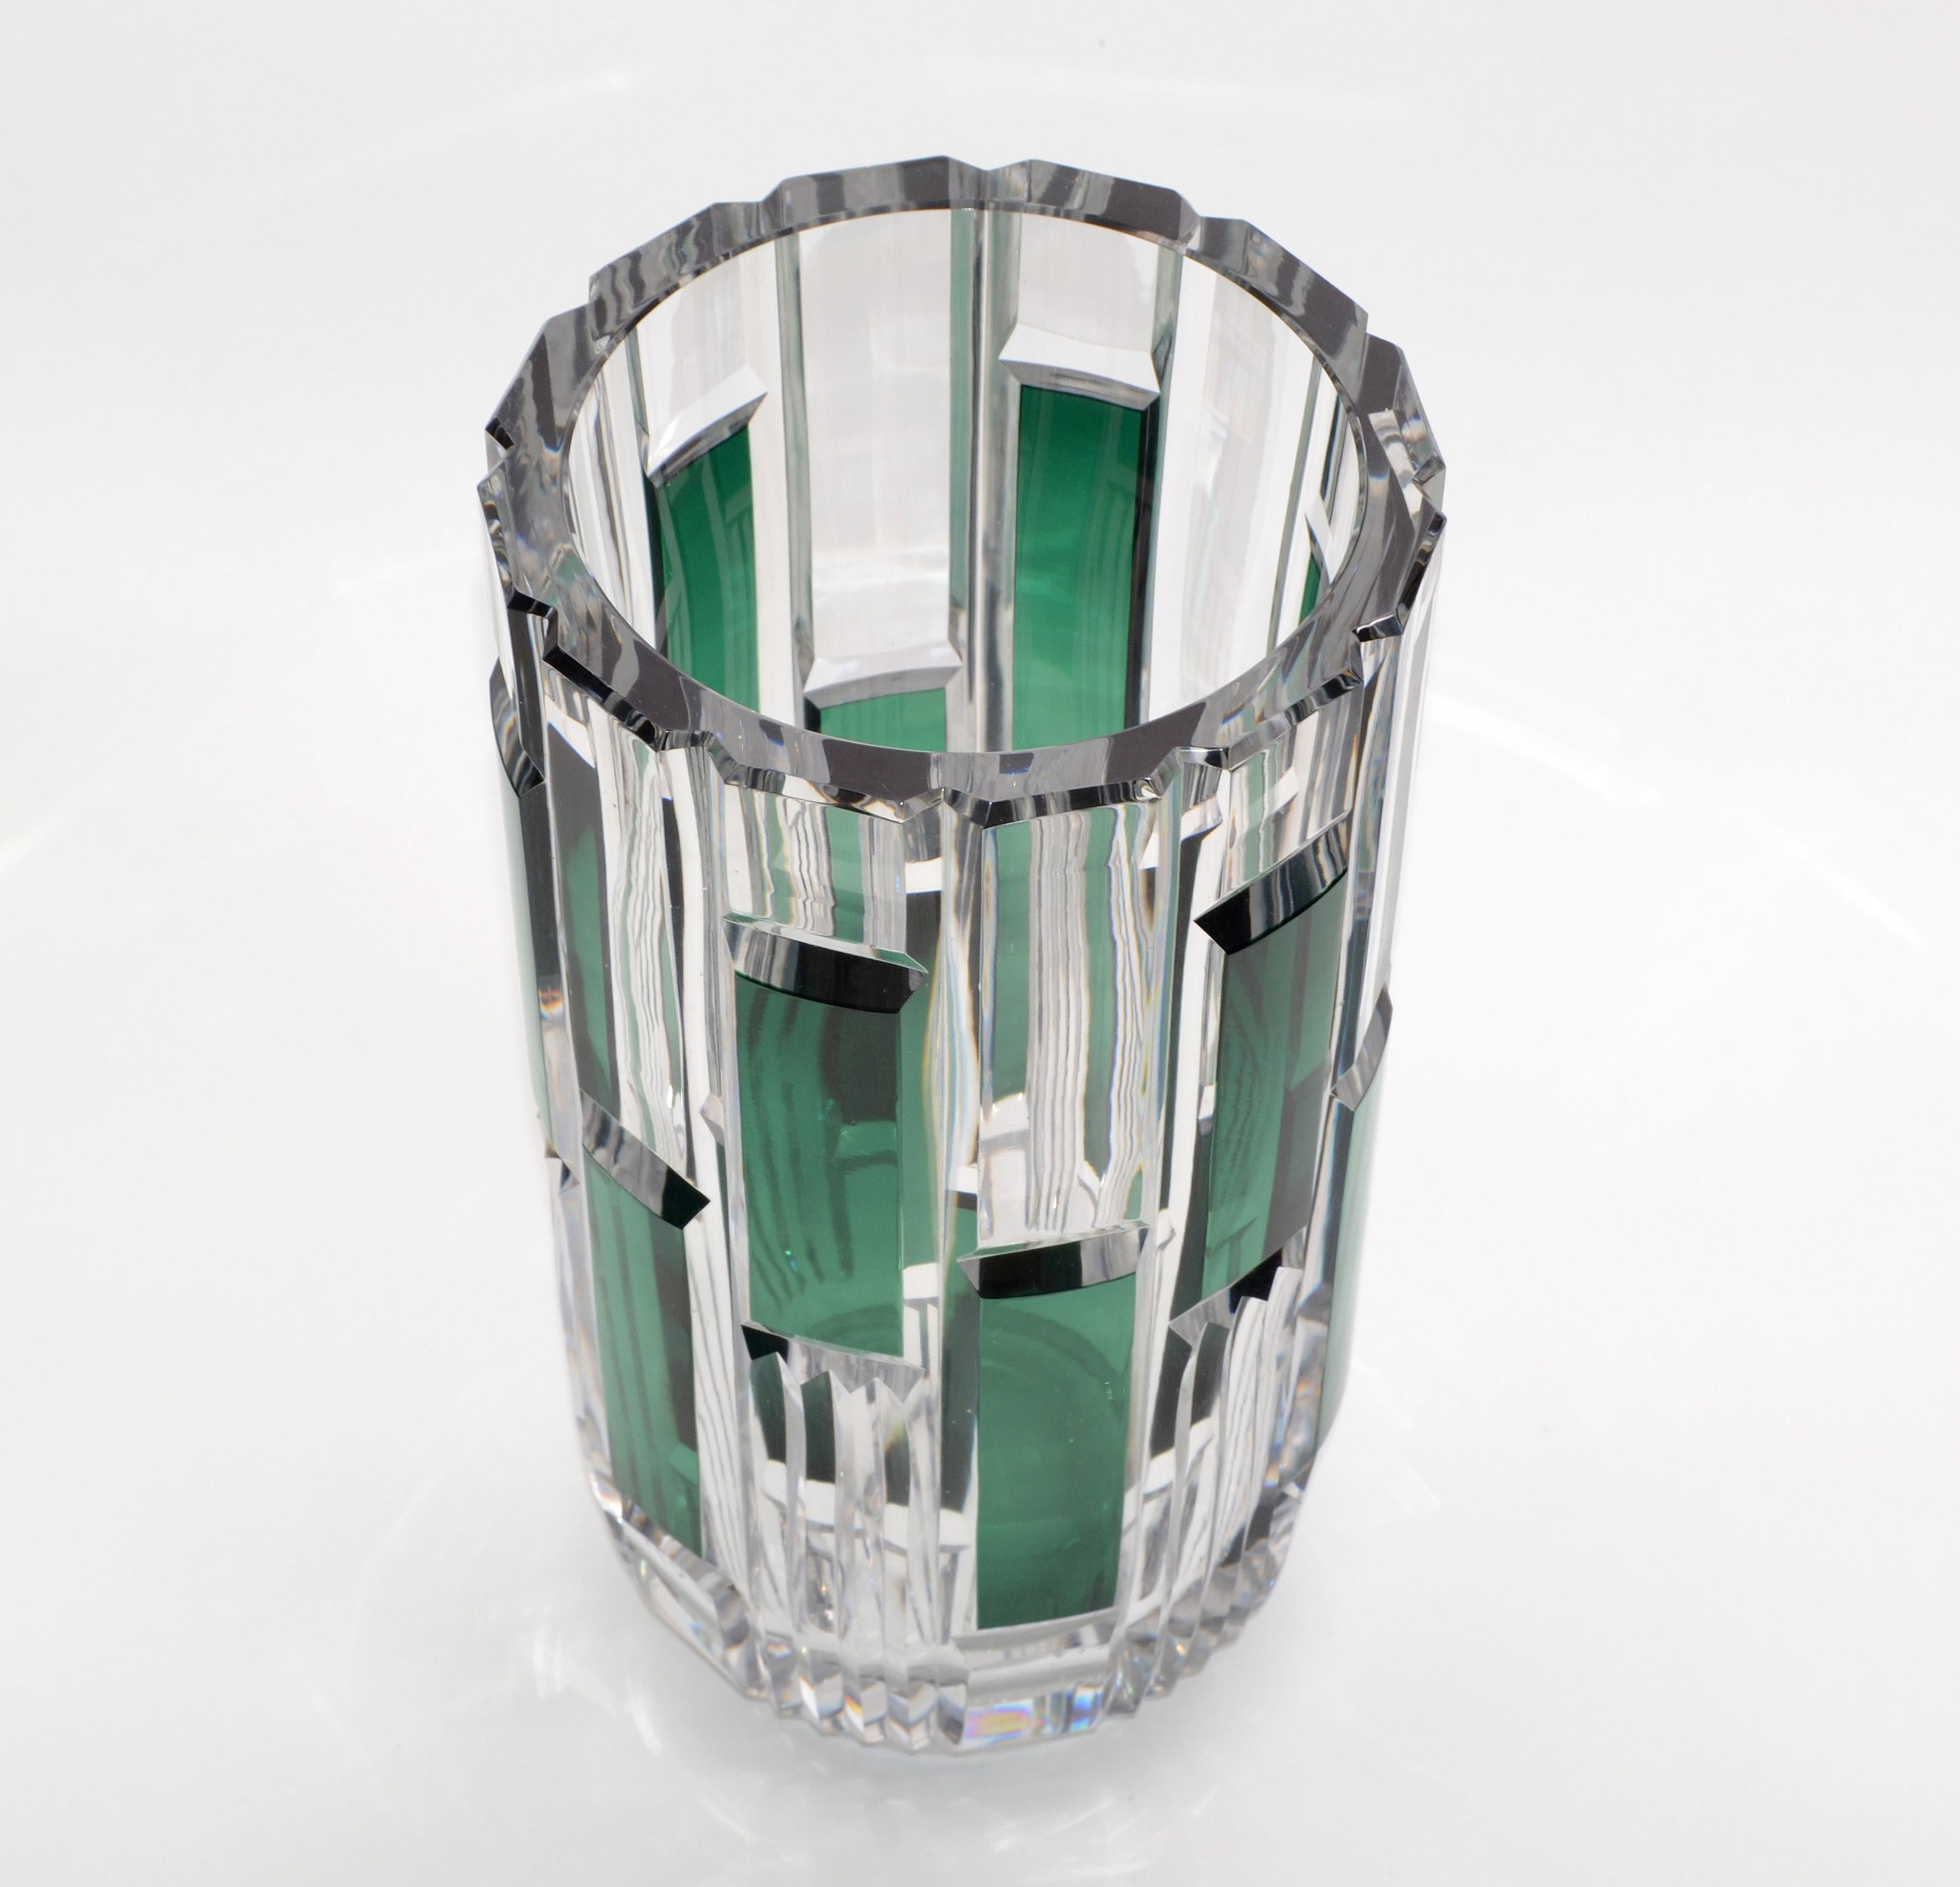 Signed Val Saint Lambert round lead crystal flower vase, handcut-to-clear, the glass clear and green is thick, deeply and evenly cut, made in Belgium.
Engraved signature Val St. Lambert.
The vase is very heavy.
Reference: Val Saint Lambert Flower